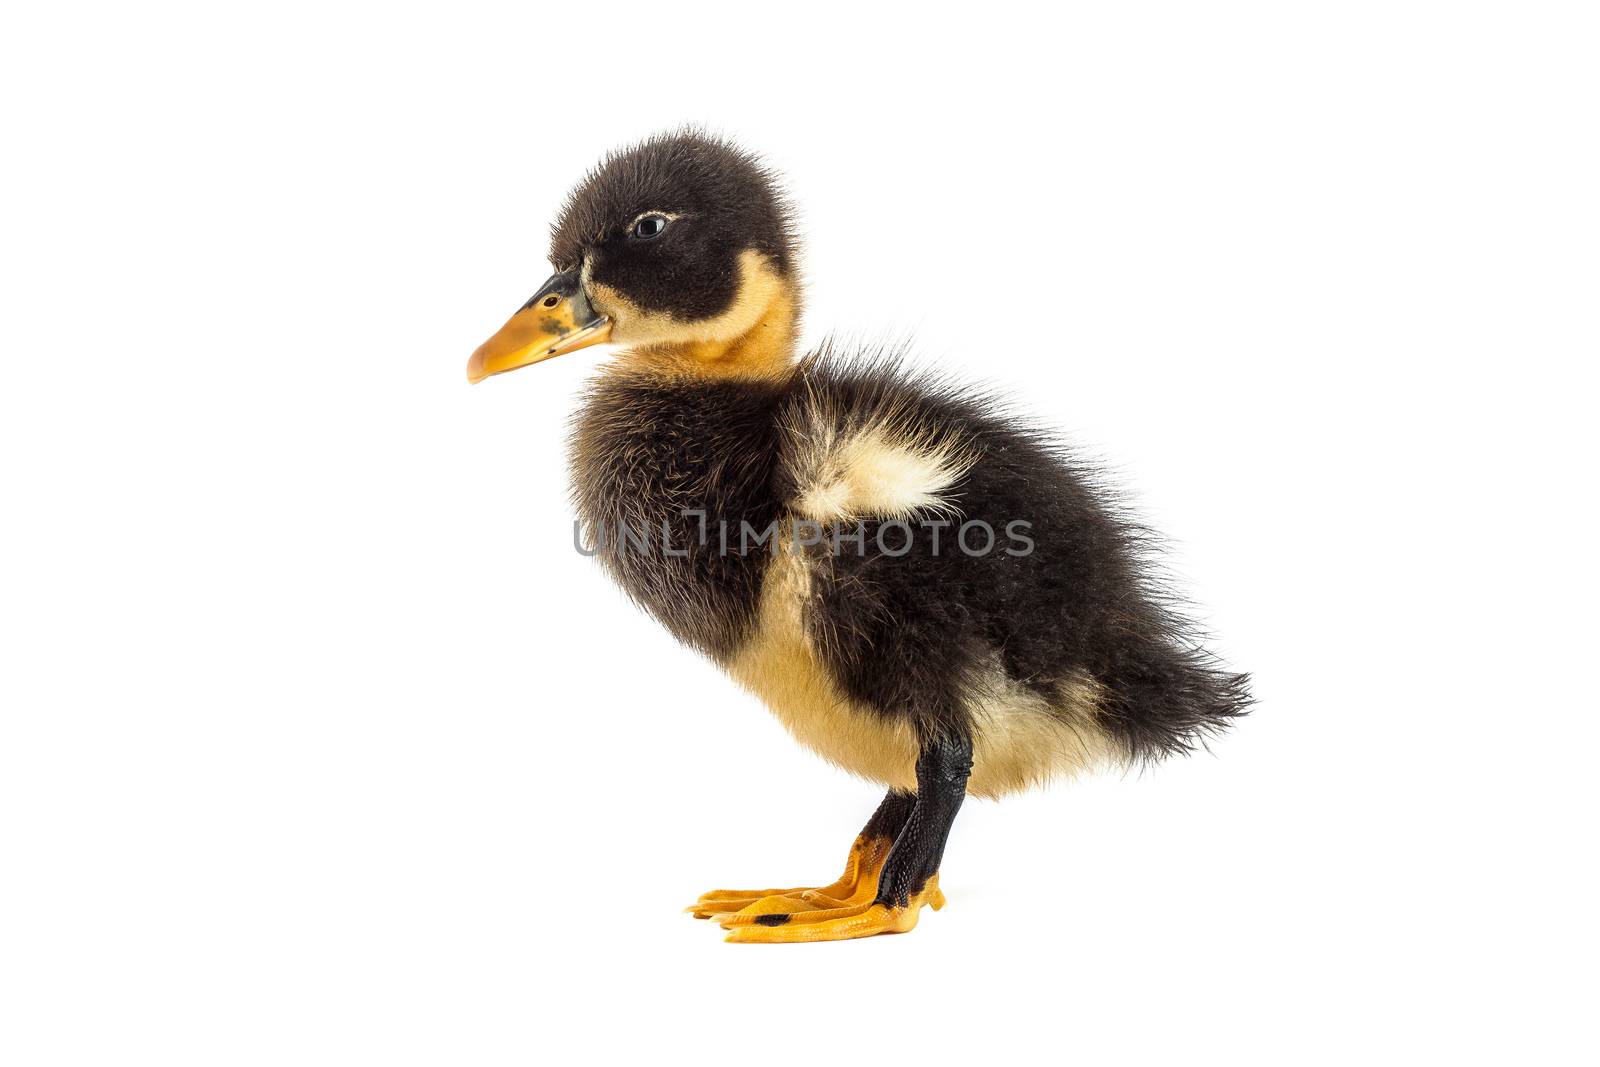 A black duckling isolated on a white background by bloodua